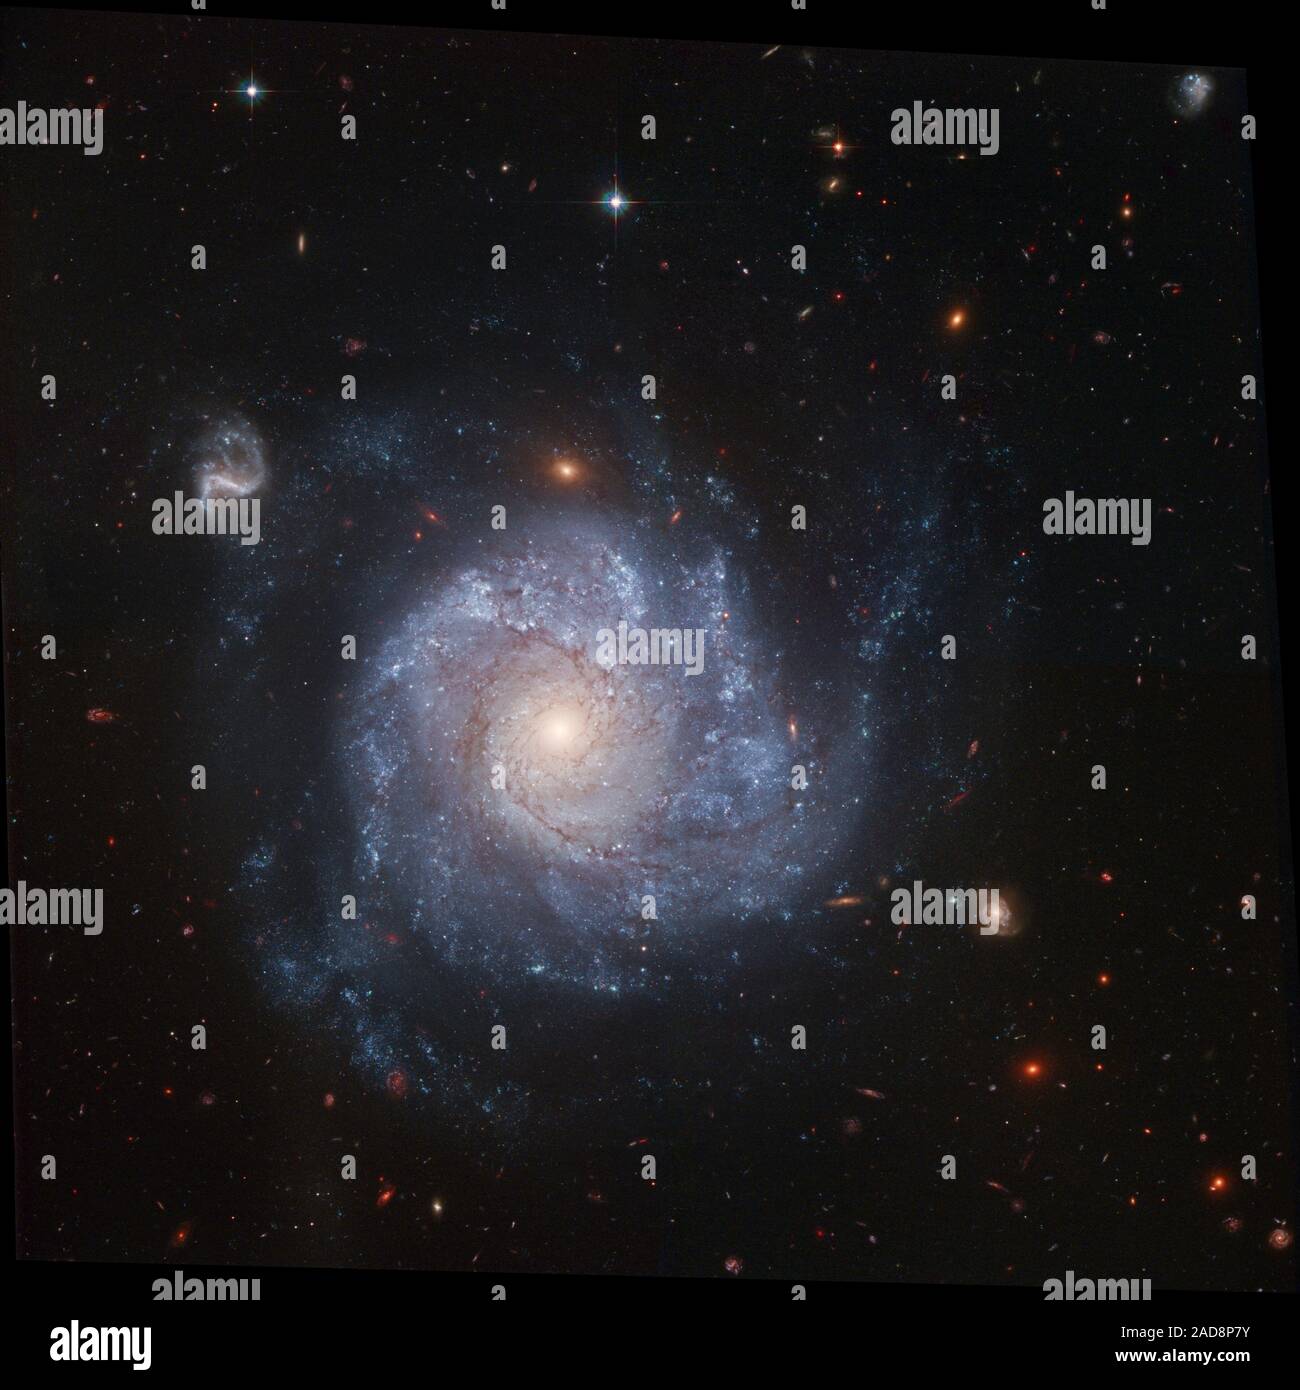 Looking like a child's pinwheel ready to be set a spinning by a gentle breeze, this dramatic spiral galaxy is one of the latest viewed by NASA's Hubble Space Telescope. Stunning details of the face-on spiral galaxy, cataloged as NGC 1309, are captured in this color image.   Recent observations of the galaxy taken in visible and infrared light come together in a colorful depiction of many of the galaxy's features. Bright blue areas of star formation pepper the spiral arms, while ruddy dust lanes follow the spiral structure into a yellowish central nucleus of older-population stars. The image is Stock Photo